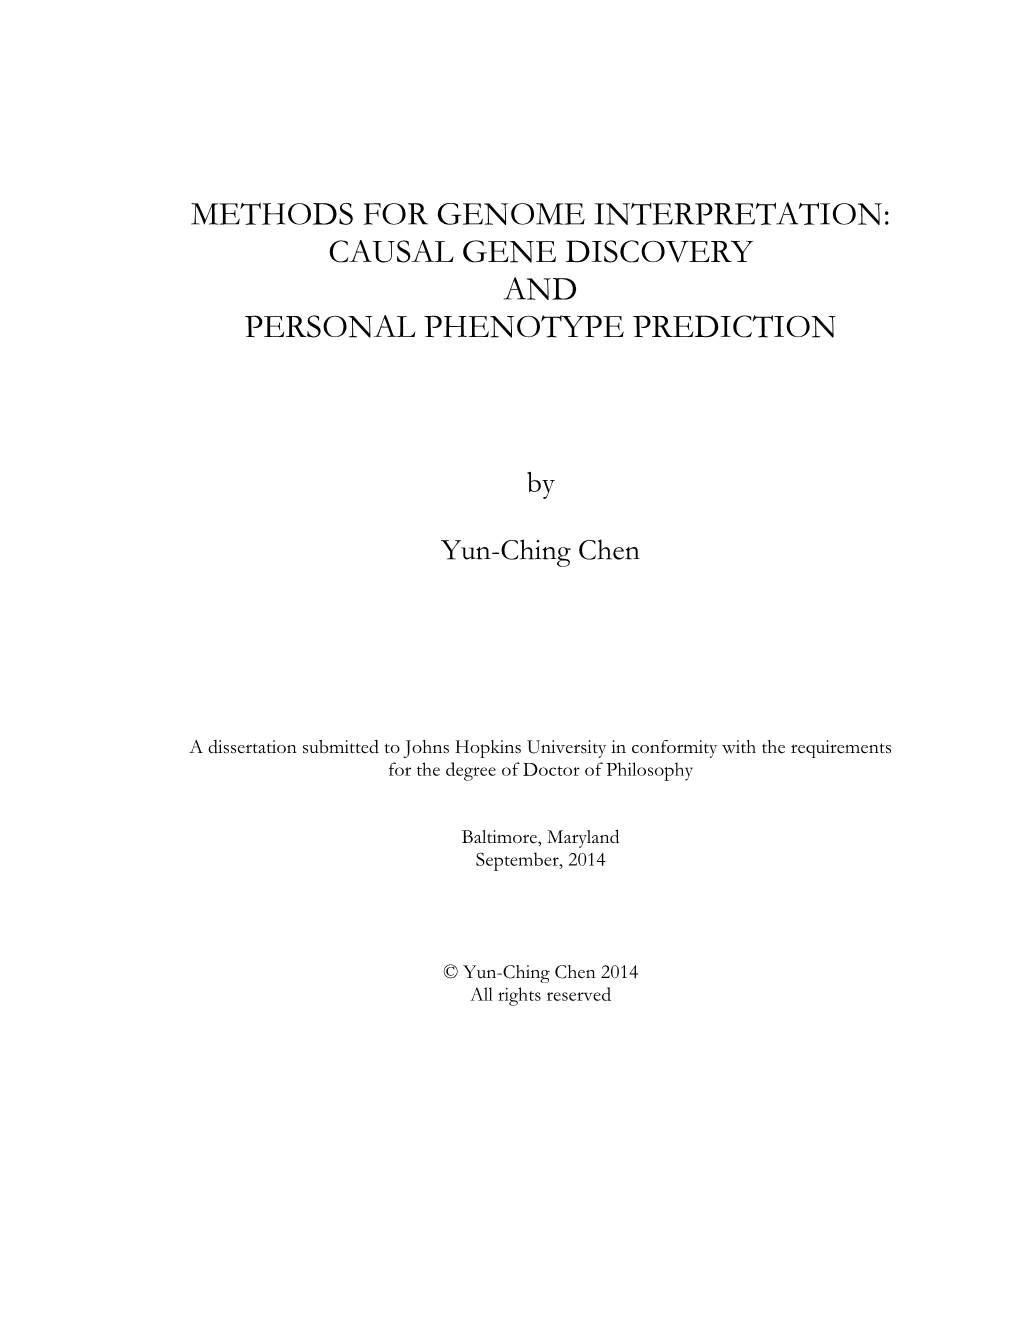 Methods for Genome Interpretation: Causal Gene Discovery and Personal Phenotype Prediction